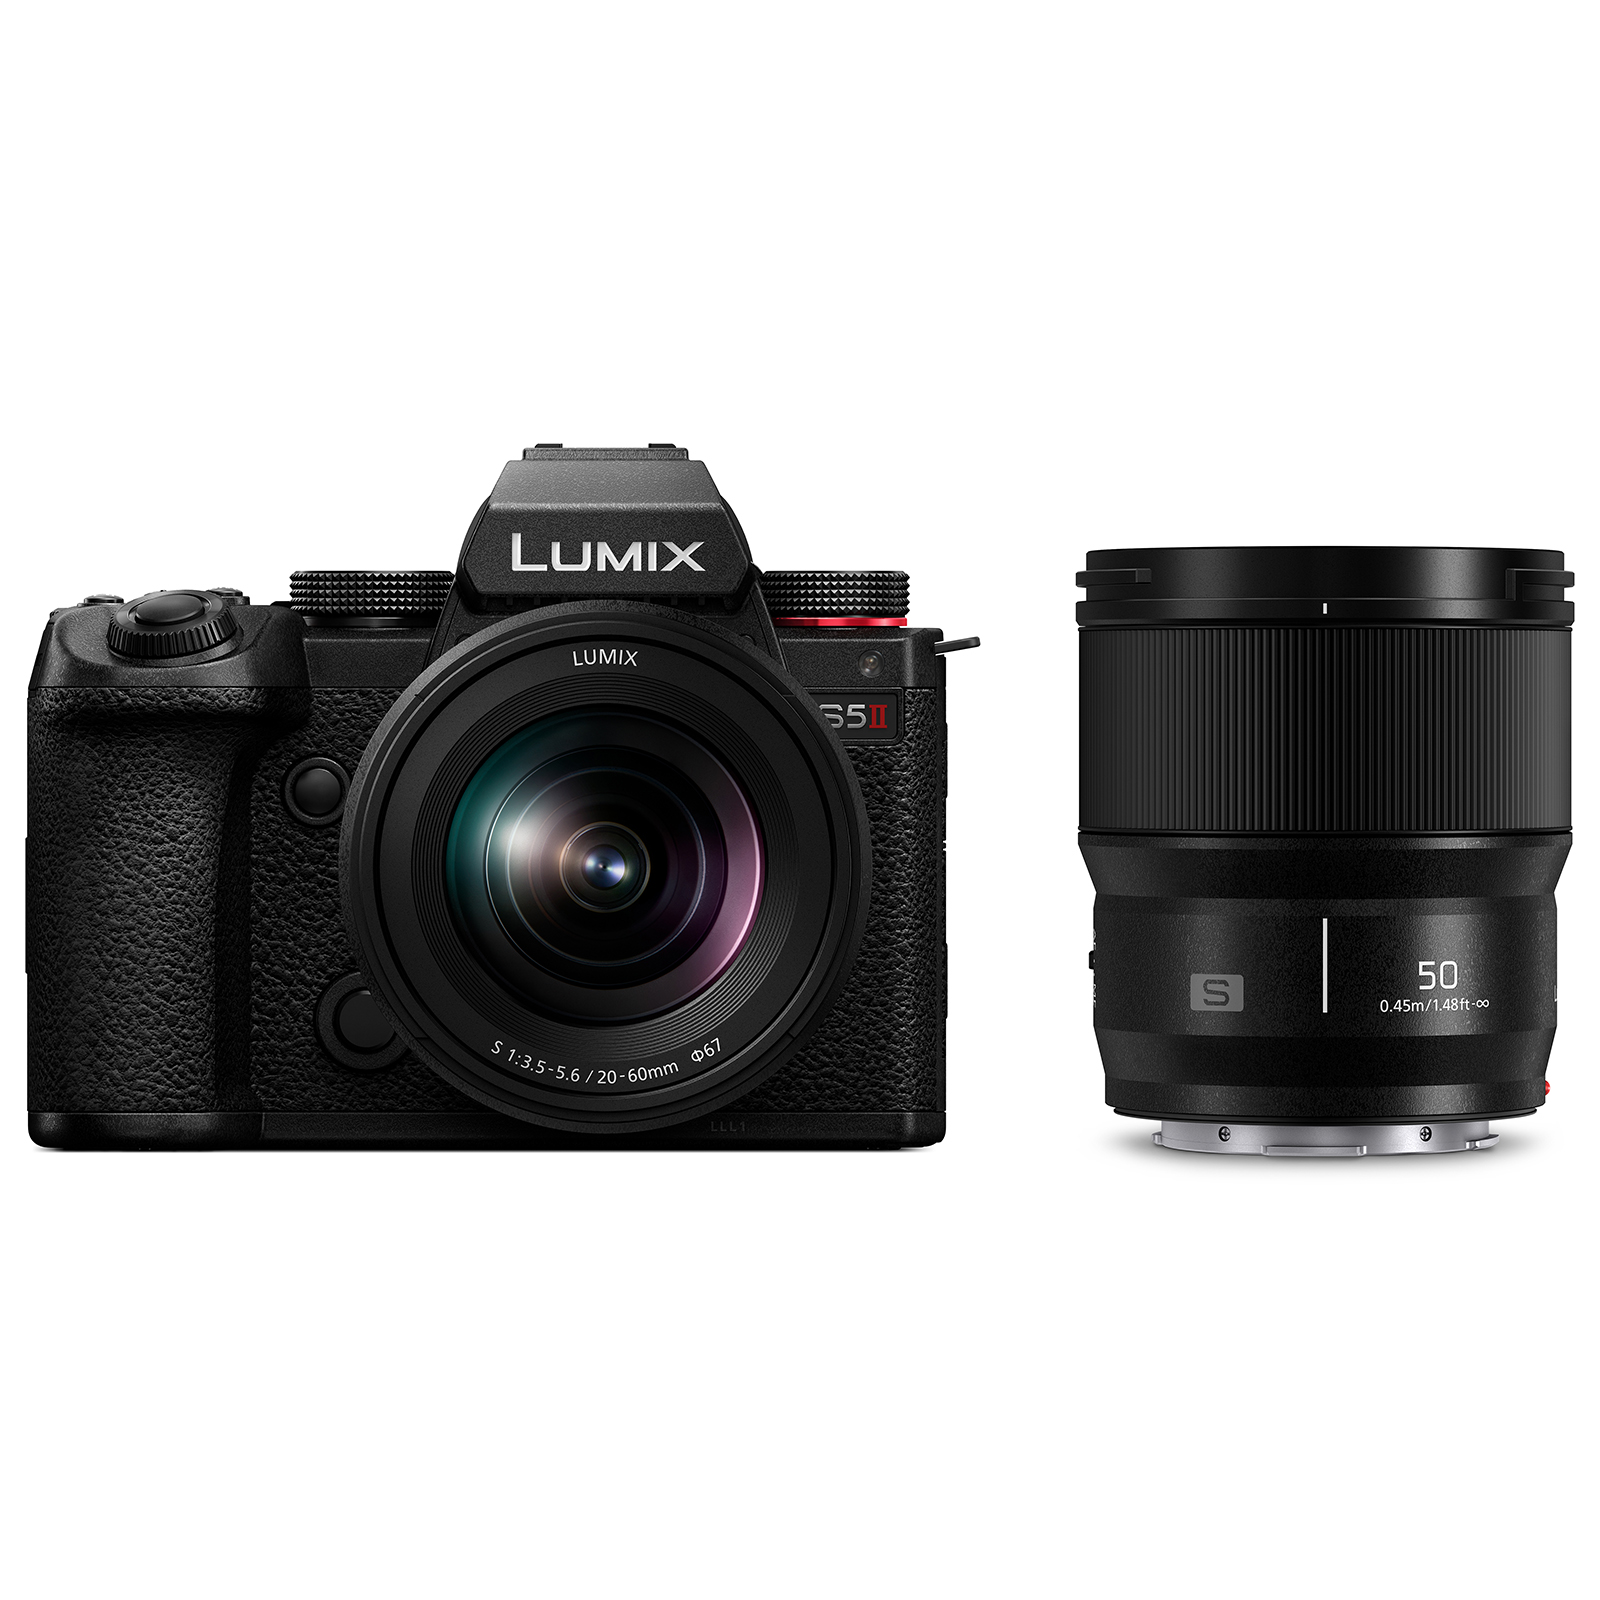 Image of Panasonic Lumix S5 II Digital Camera with 2060mm and 50mm Lens